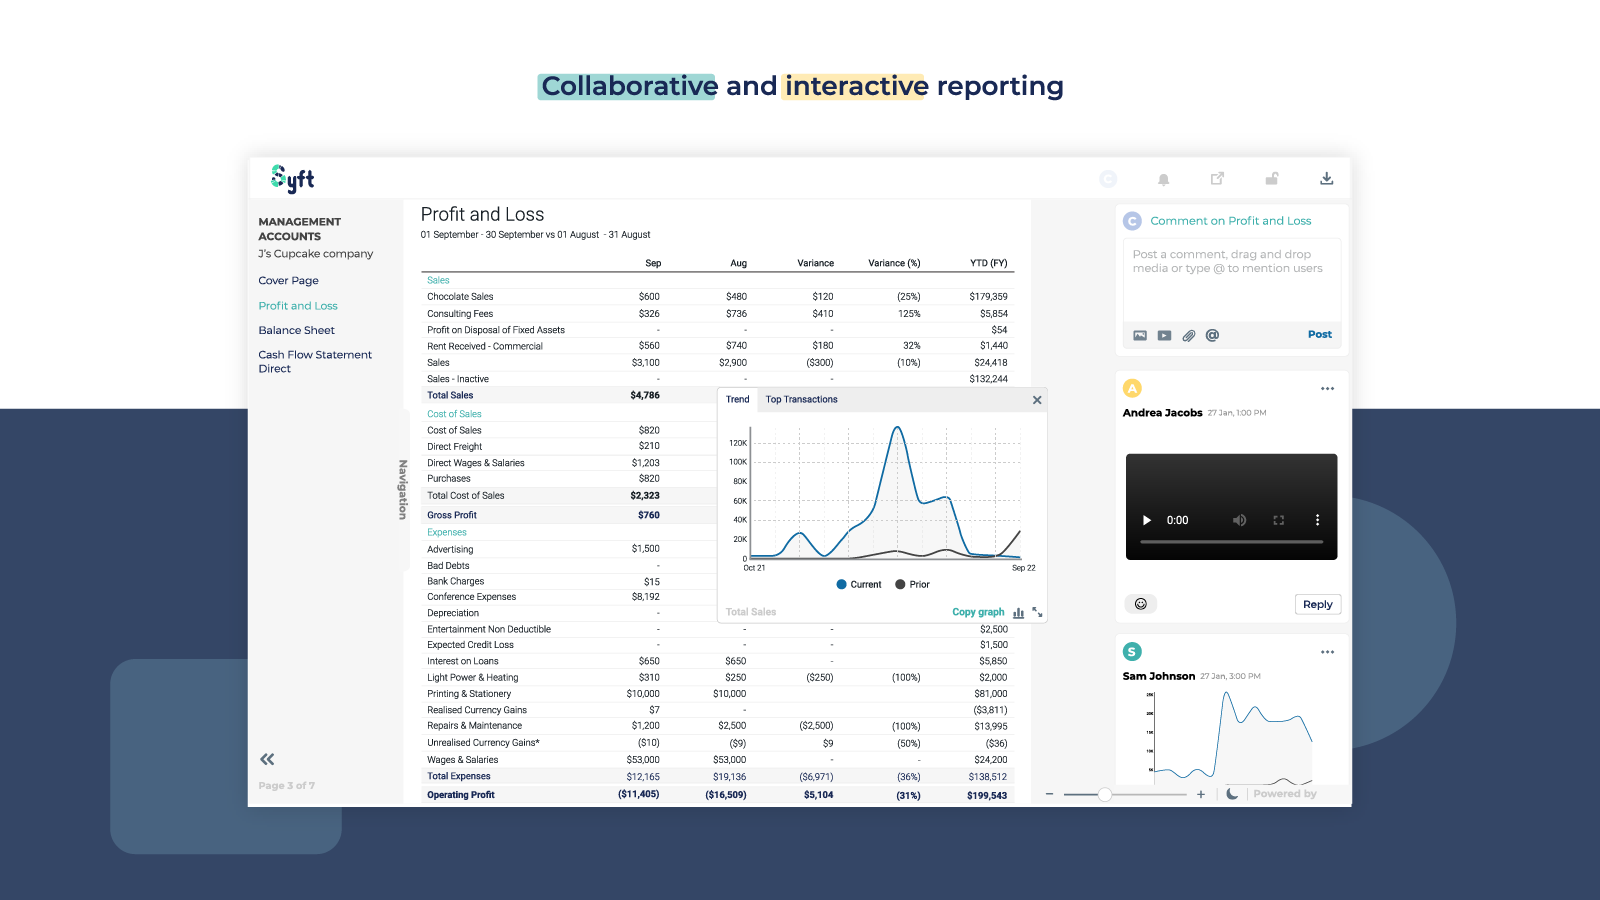 Collaborative & Interactive reporting: Live views are secure, interactive, and collaborative online links to reports - the future of reporting.